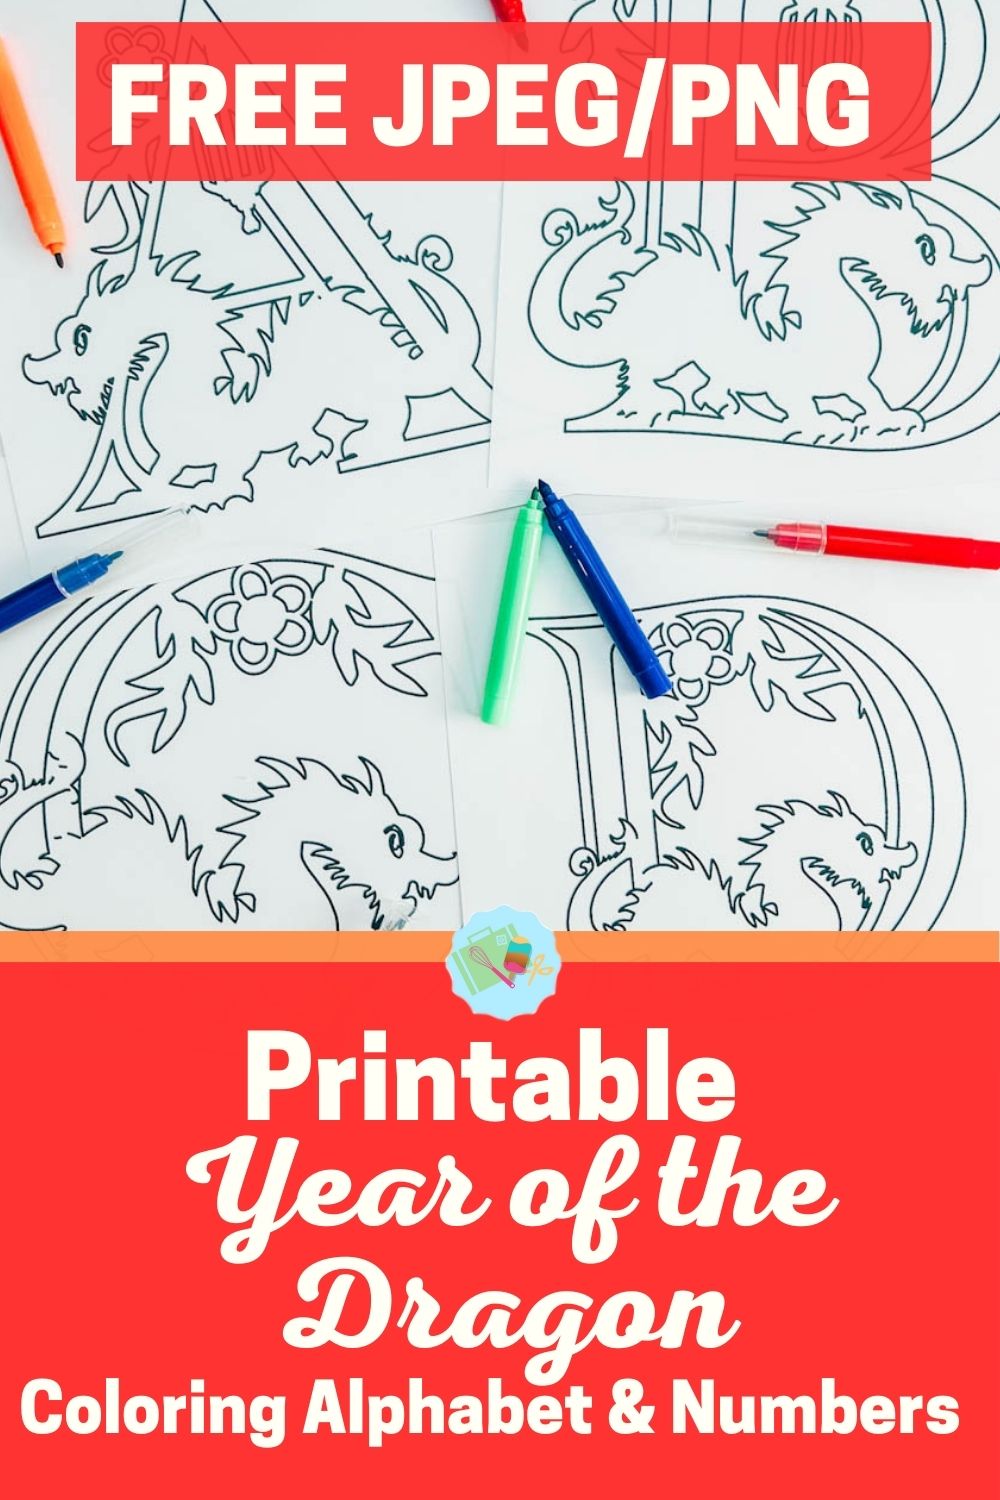 Free printable Year of the Dragon Alphabet and Numer Set for Chinese New Year